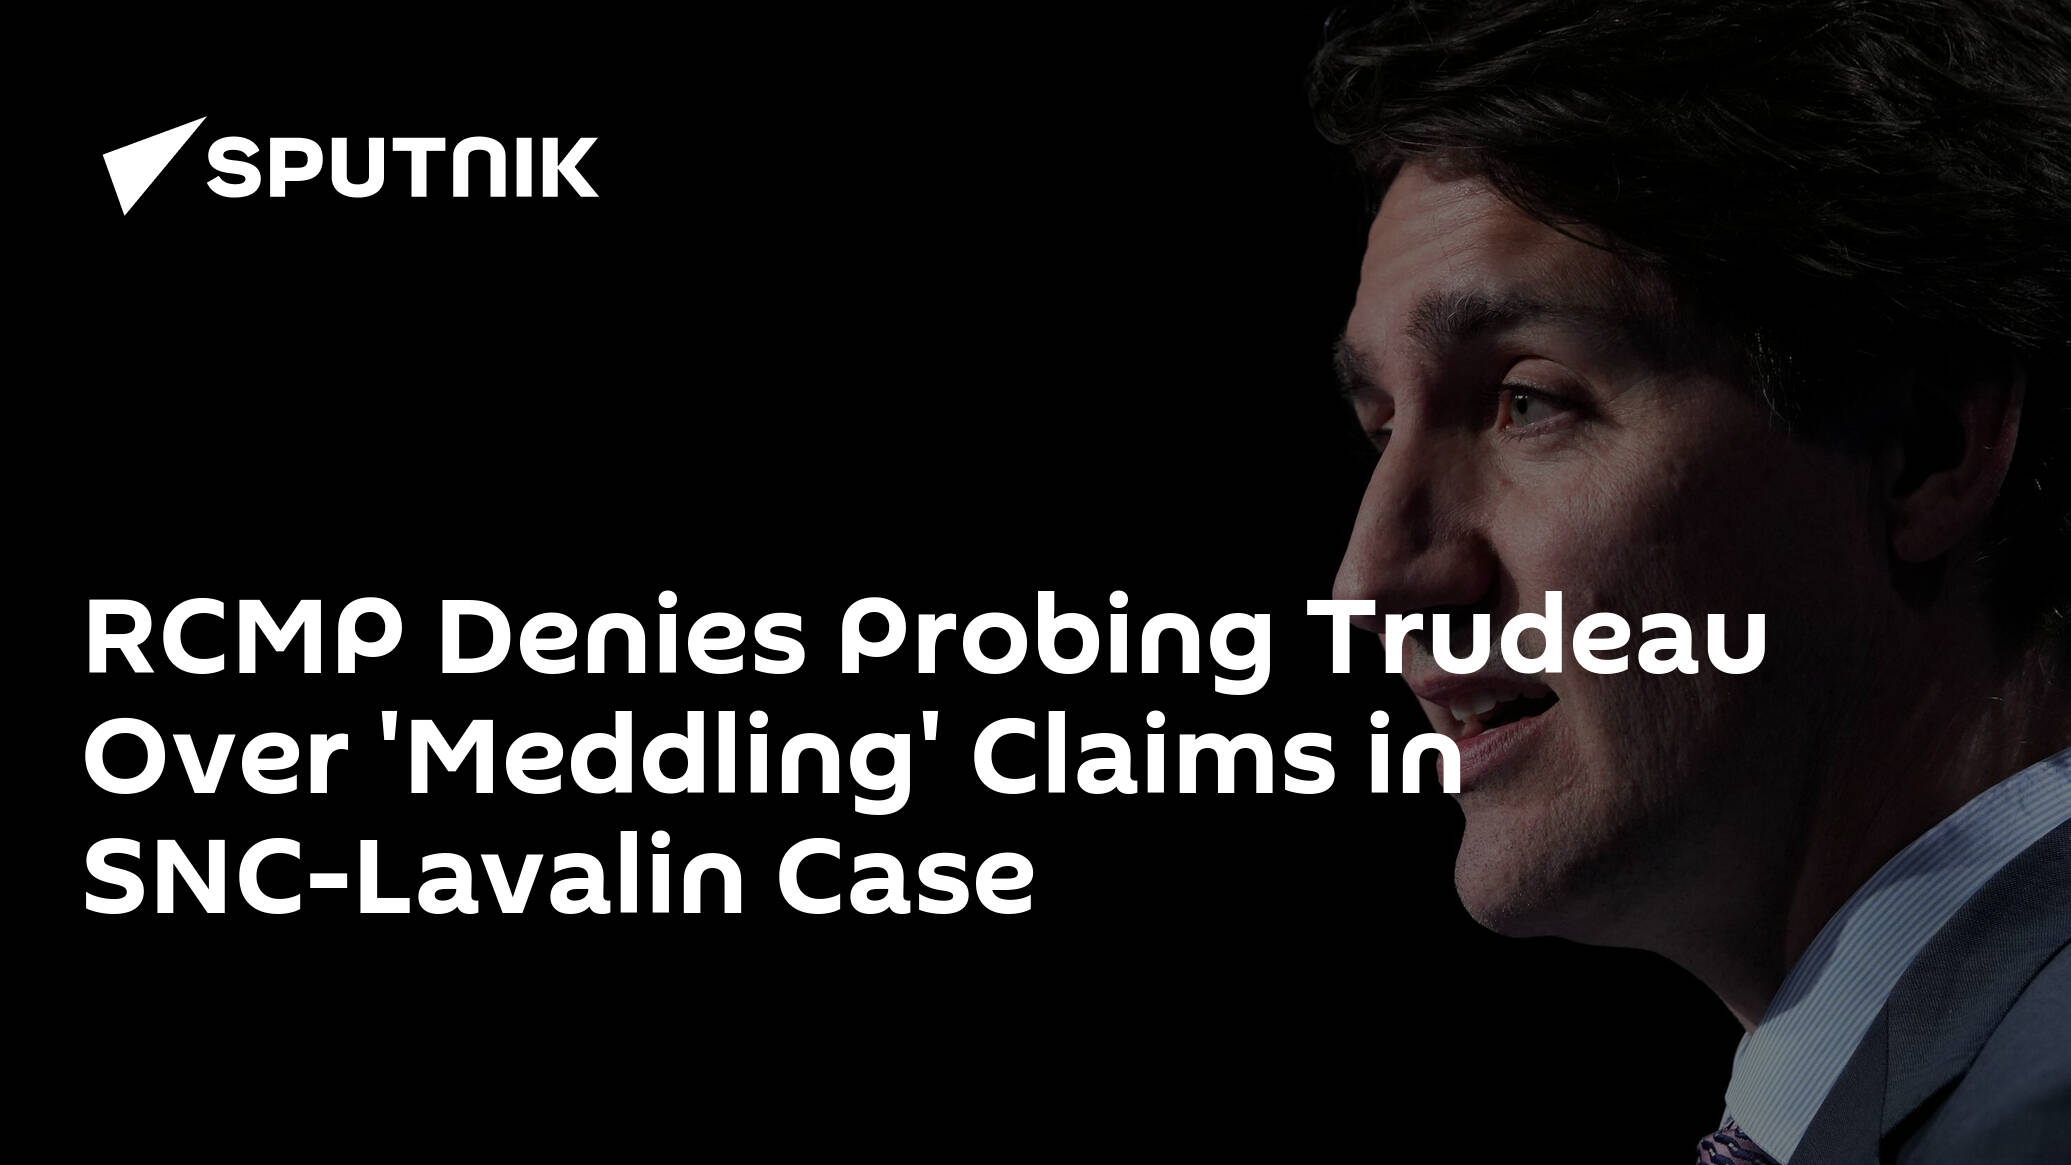 RCMP Denies Probing Trudeau Over 'Meddling' Claims in SNC-Lavalin Case